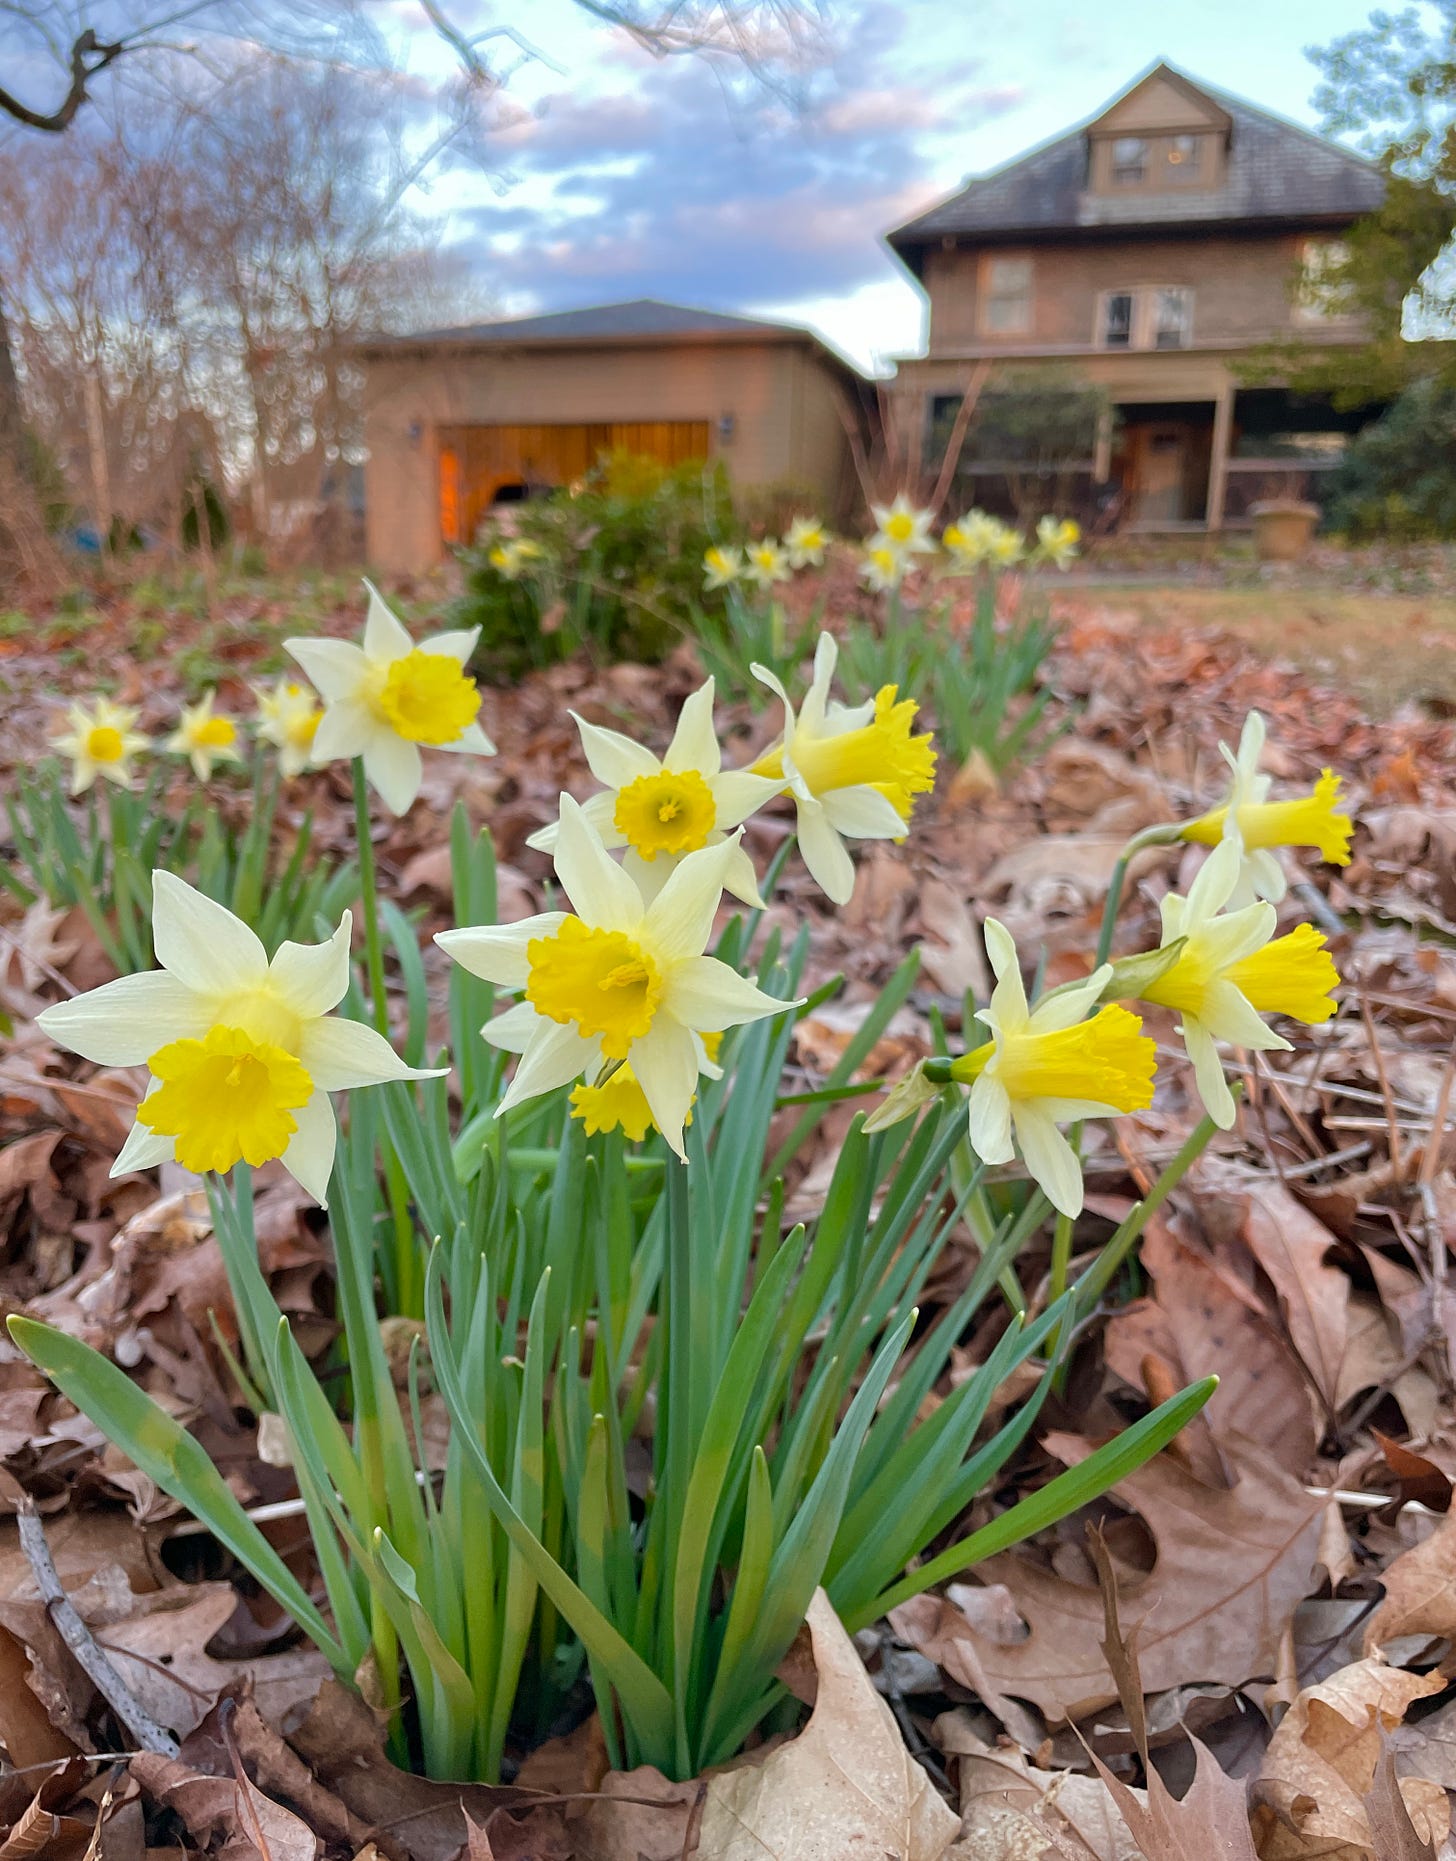 Narcissus ‘Topolino’ is my favorite at this time of year. We have added 400 more this year, and the newer bulbs are always slower than the older ones to come out, as they need to make up all of the root growth they were missing in October/Nov when they were planted. 